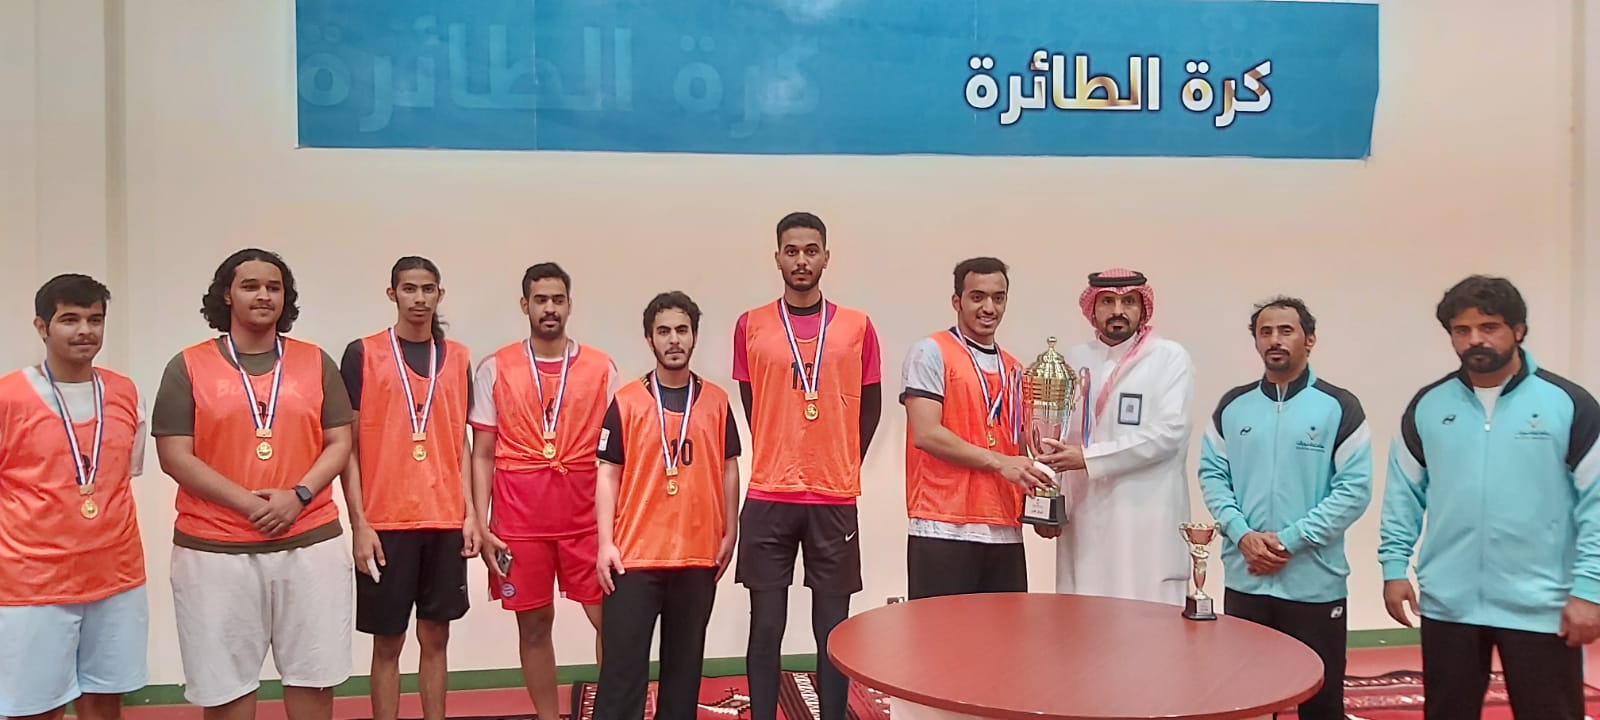 The Applied College emerged victorious and won the championship cup of the Najran University Volleyball League - Second Semester 1445